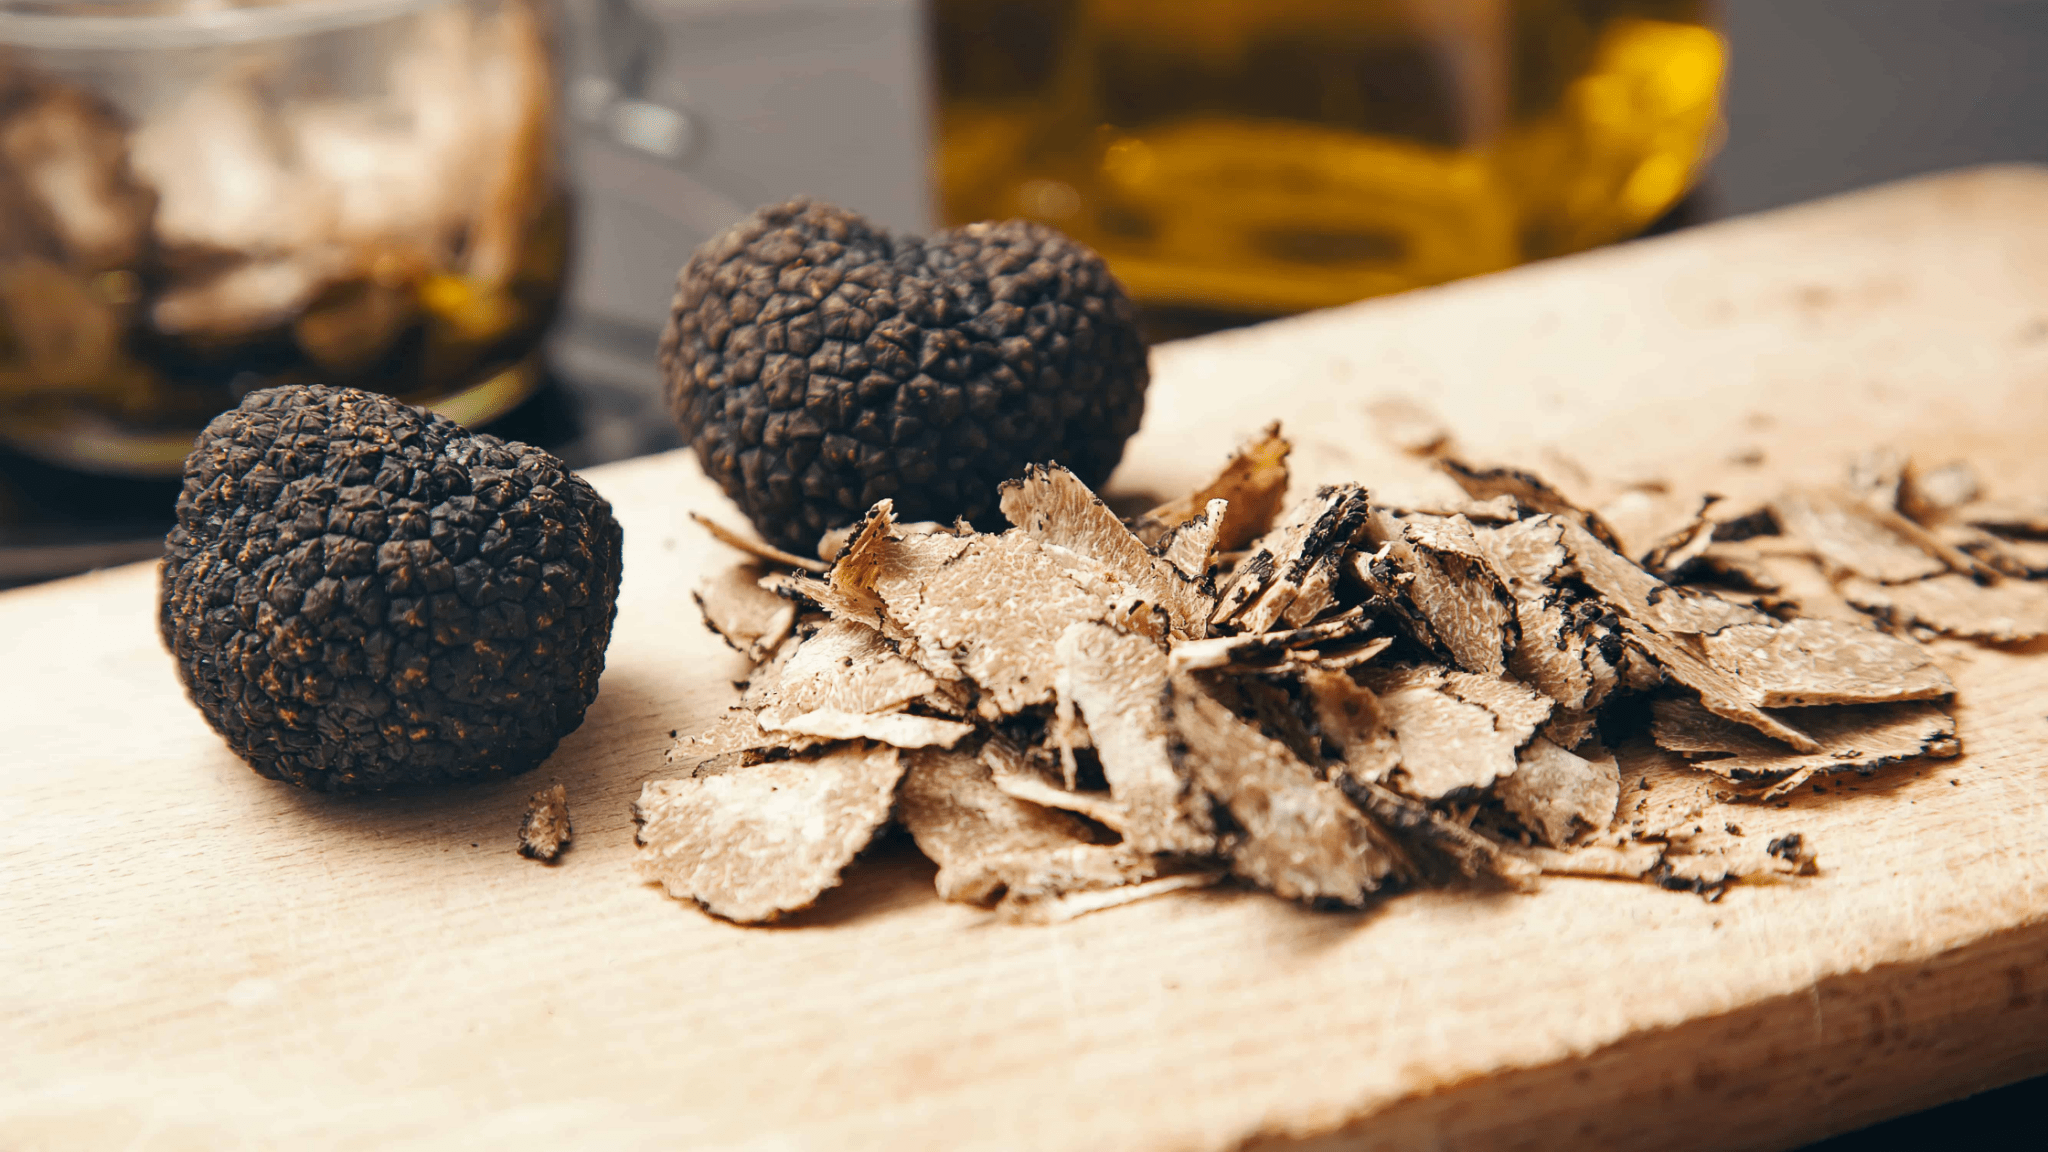 8 Fascinating Facts Every Truffle Enthusiast Needs to Know - Aroma Truffle